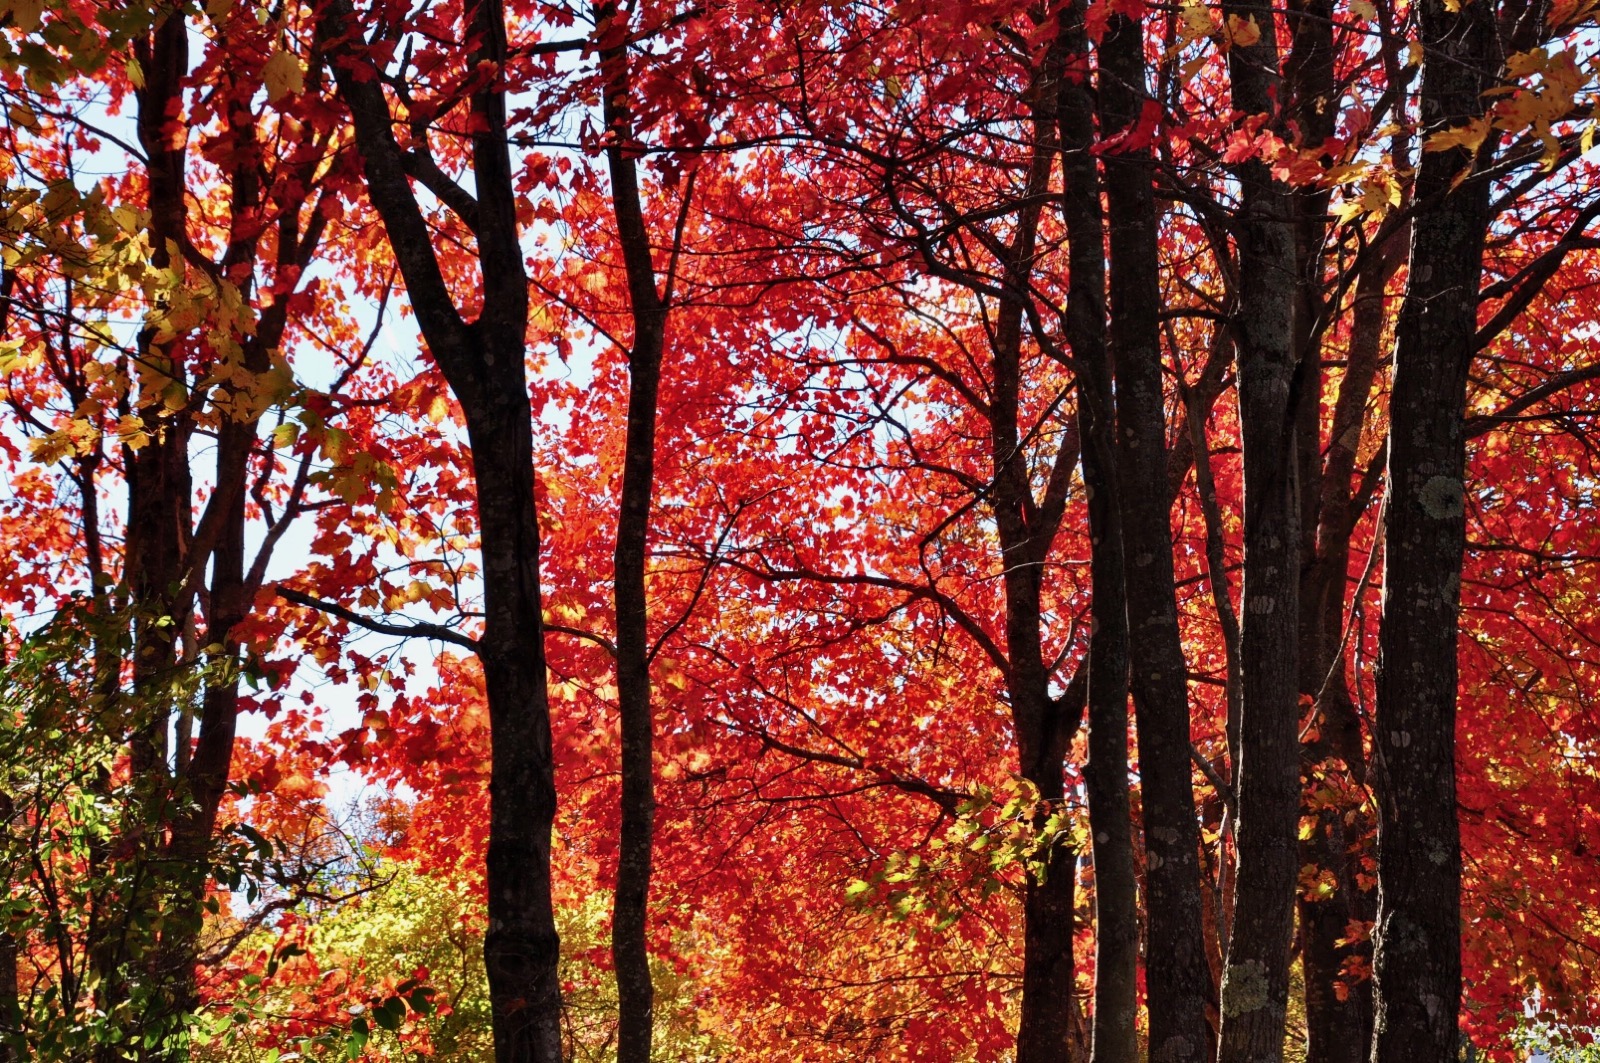 Colorful fall foliage in Wells Research Reserve.